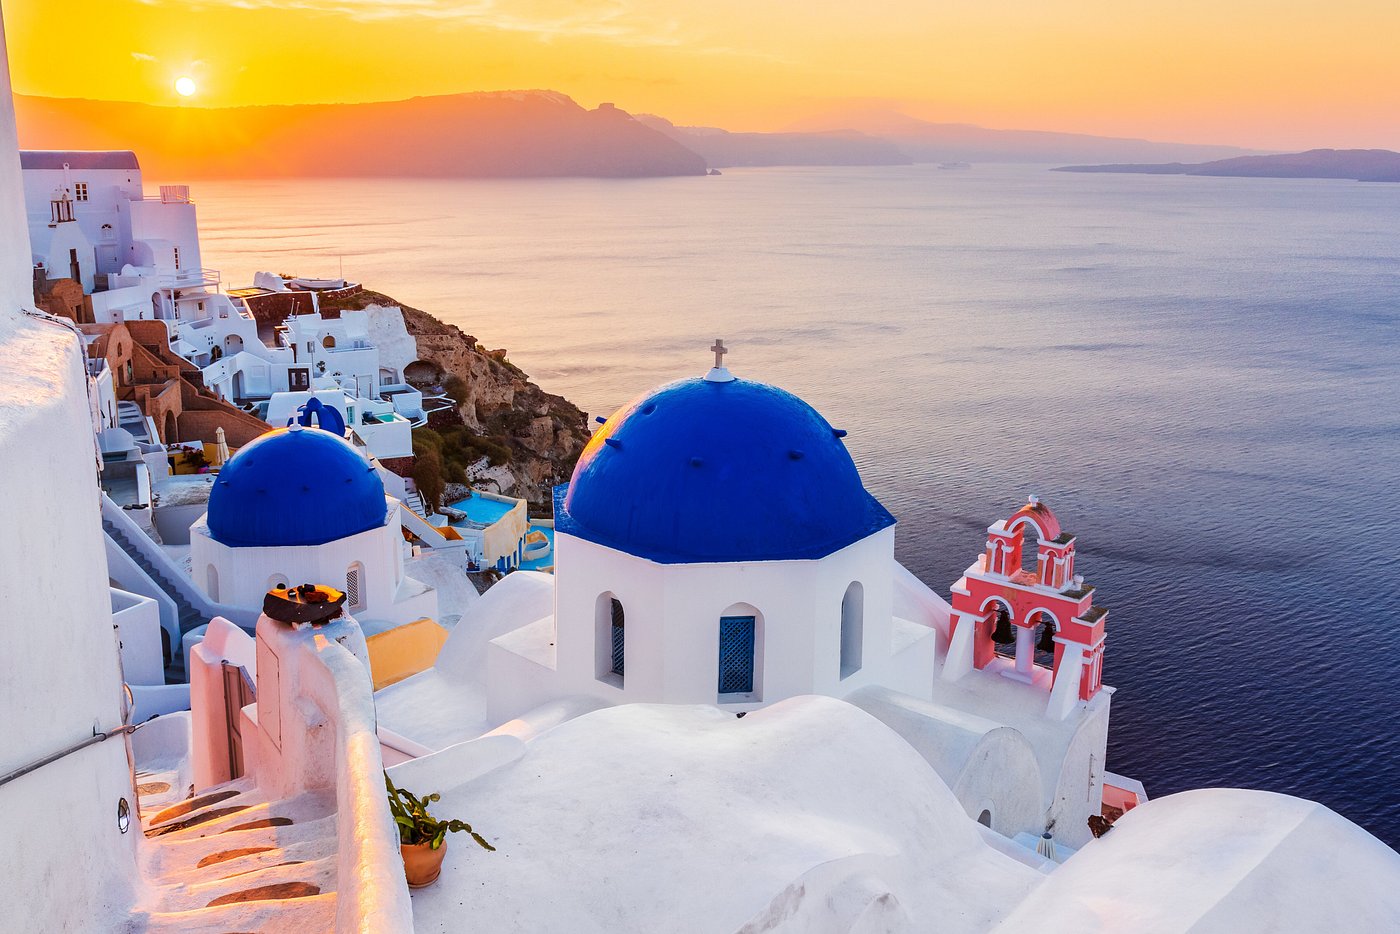 Join The Cooking Mom in Greece